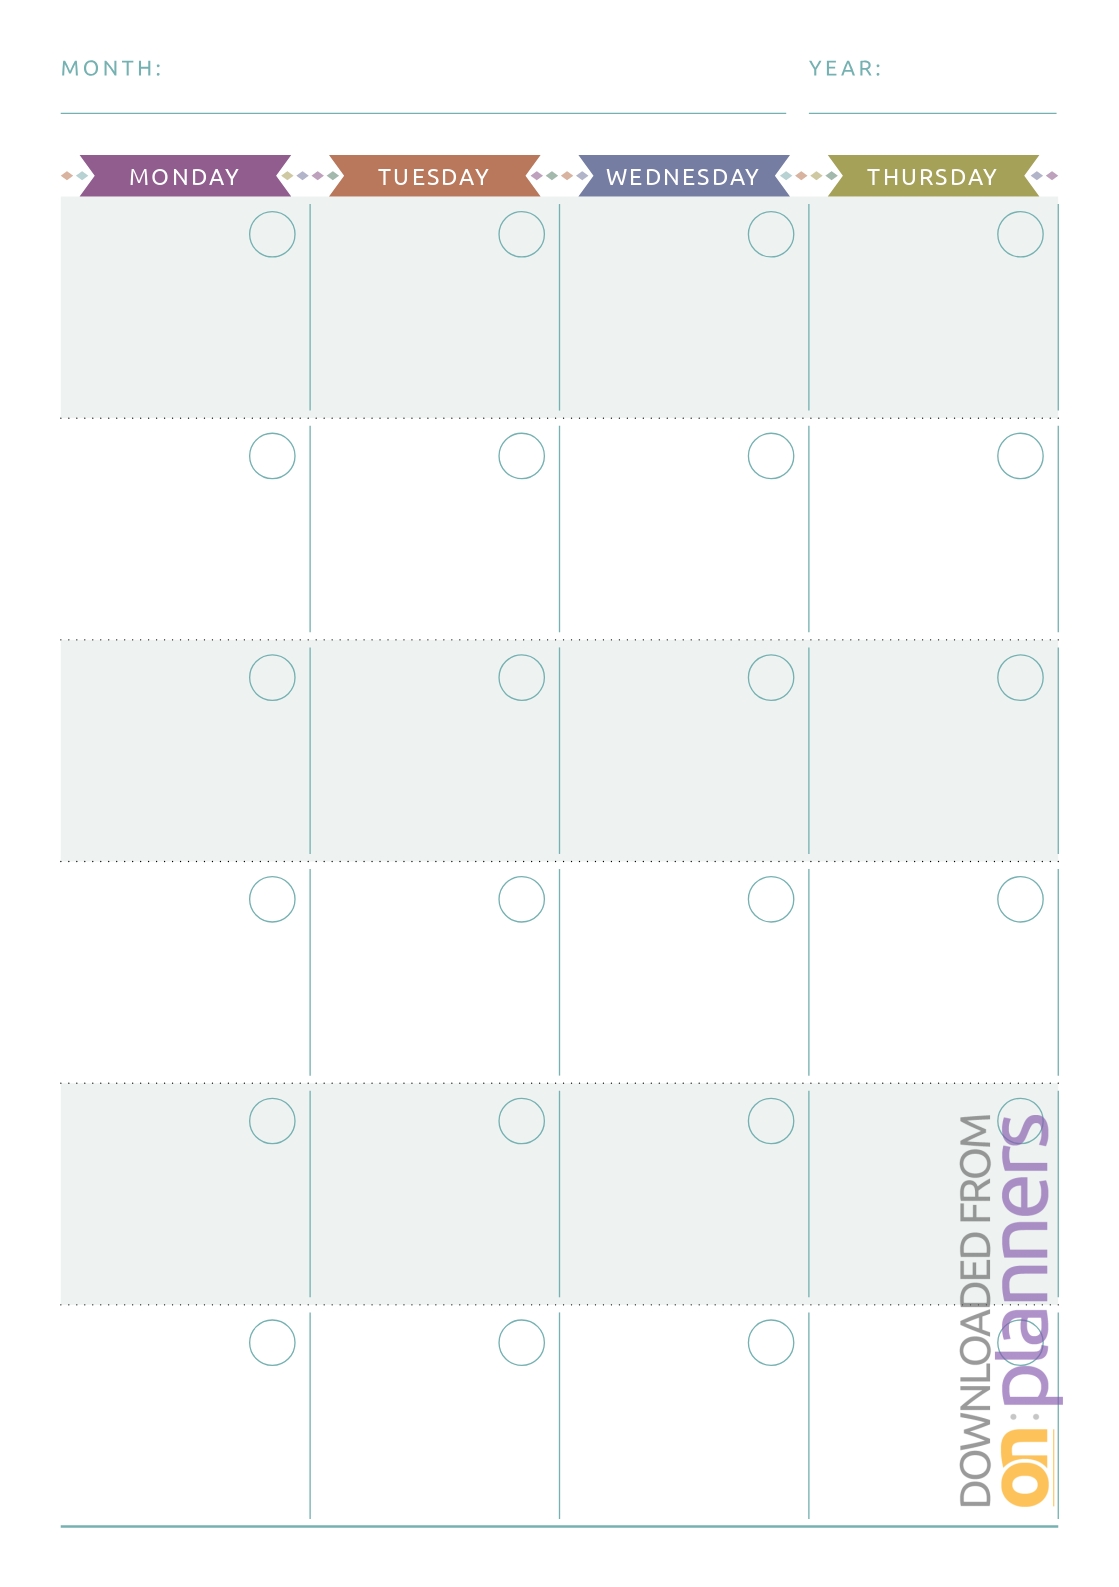 Download Printable Monthly Calendar Planner Undated - Casual Blank Monthly Planner No Dates